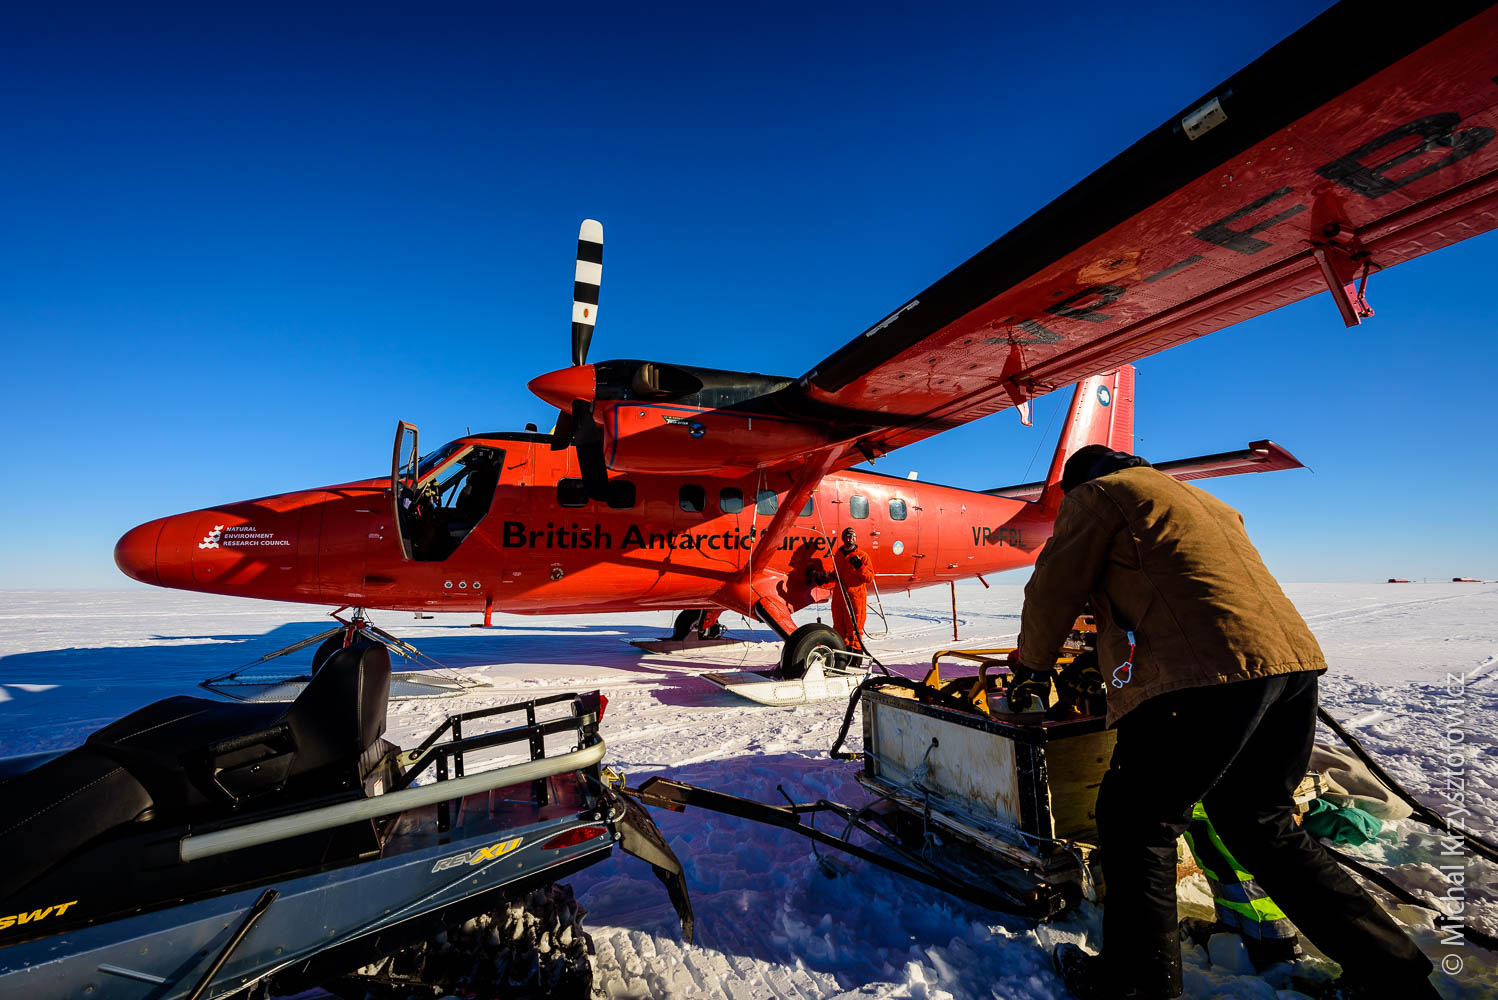 Refueling the BAS Twin Otter